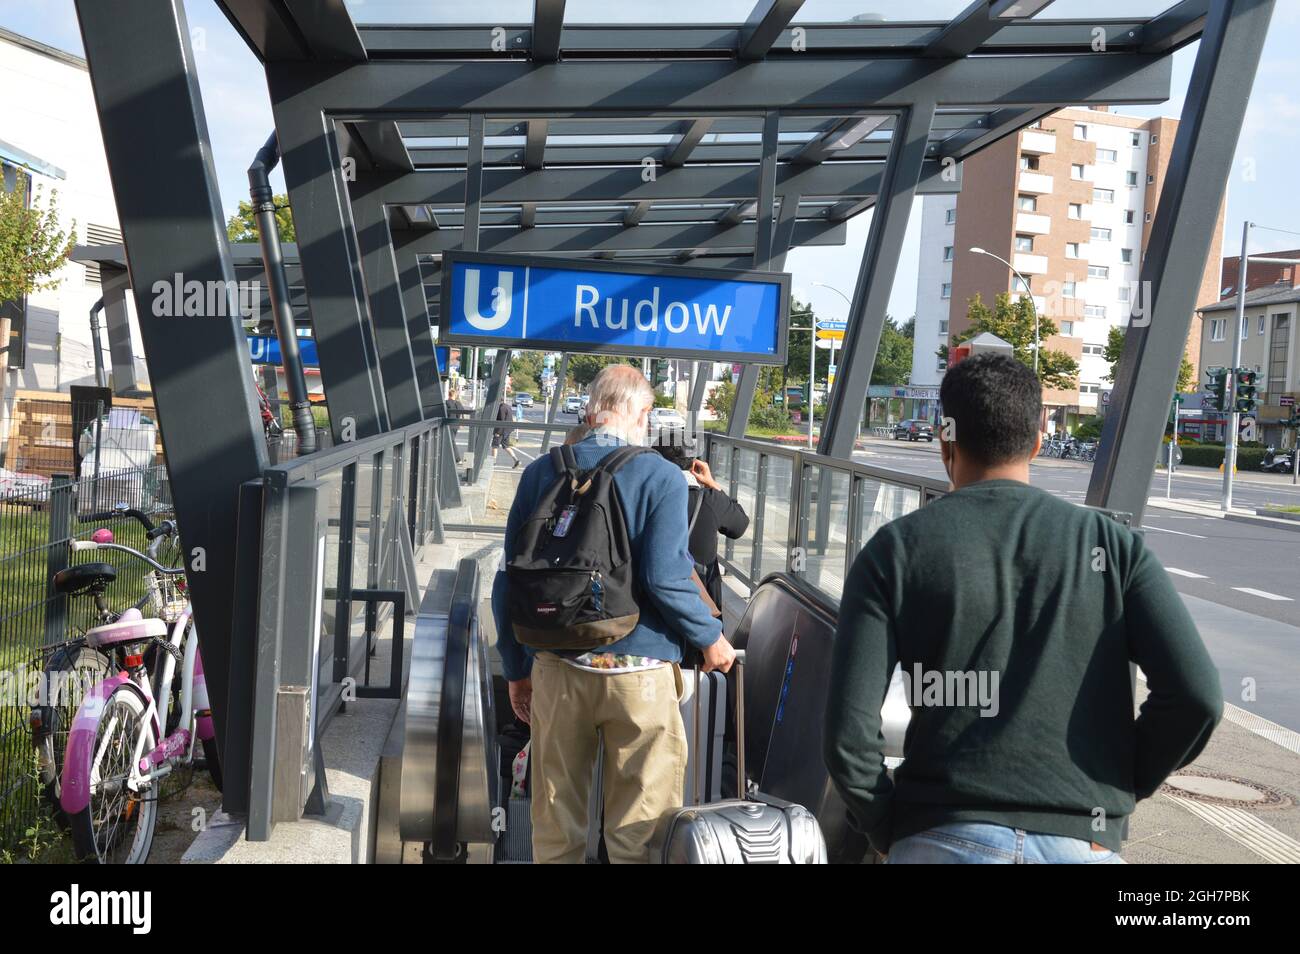 Entrance of Rudow subway station in Berlin, Germany - September 5, 2021. Stock Photo